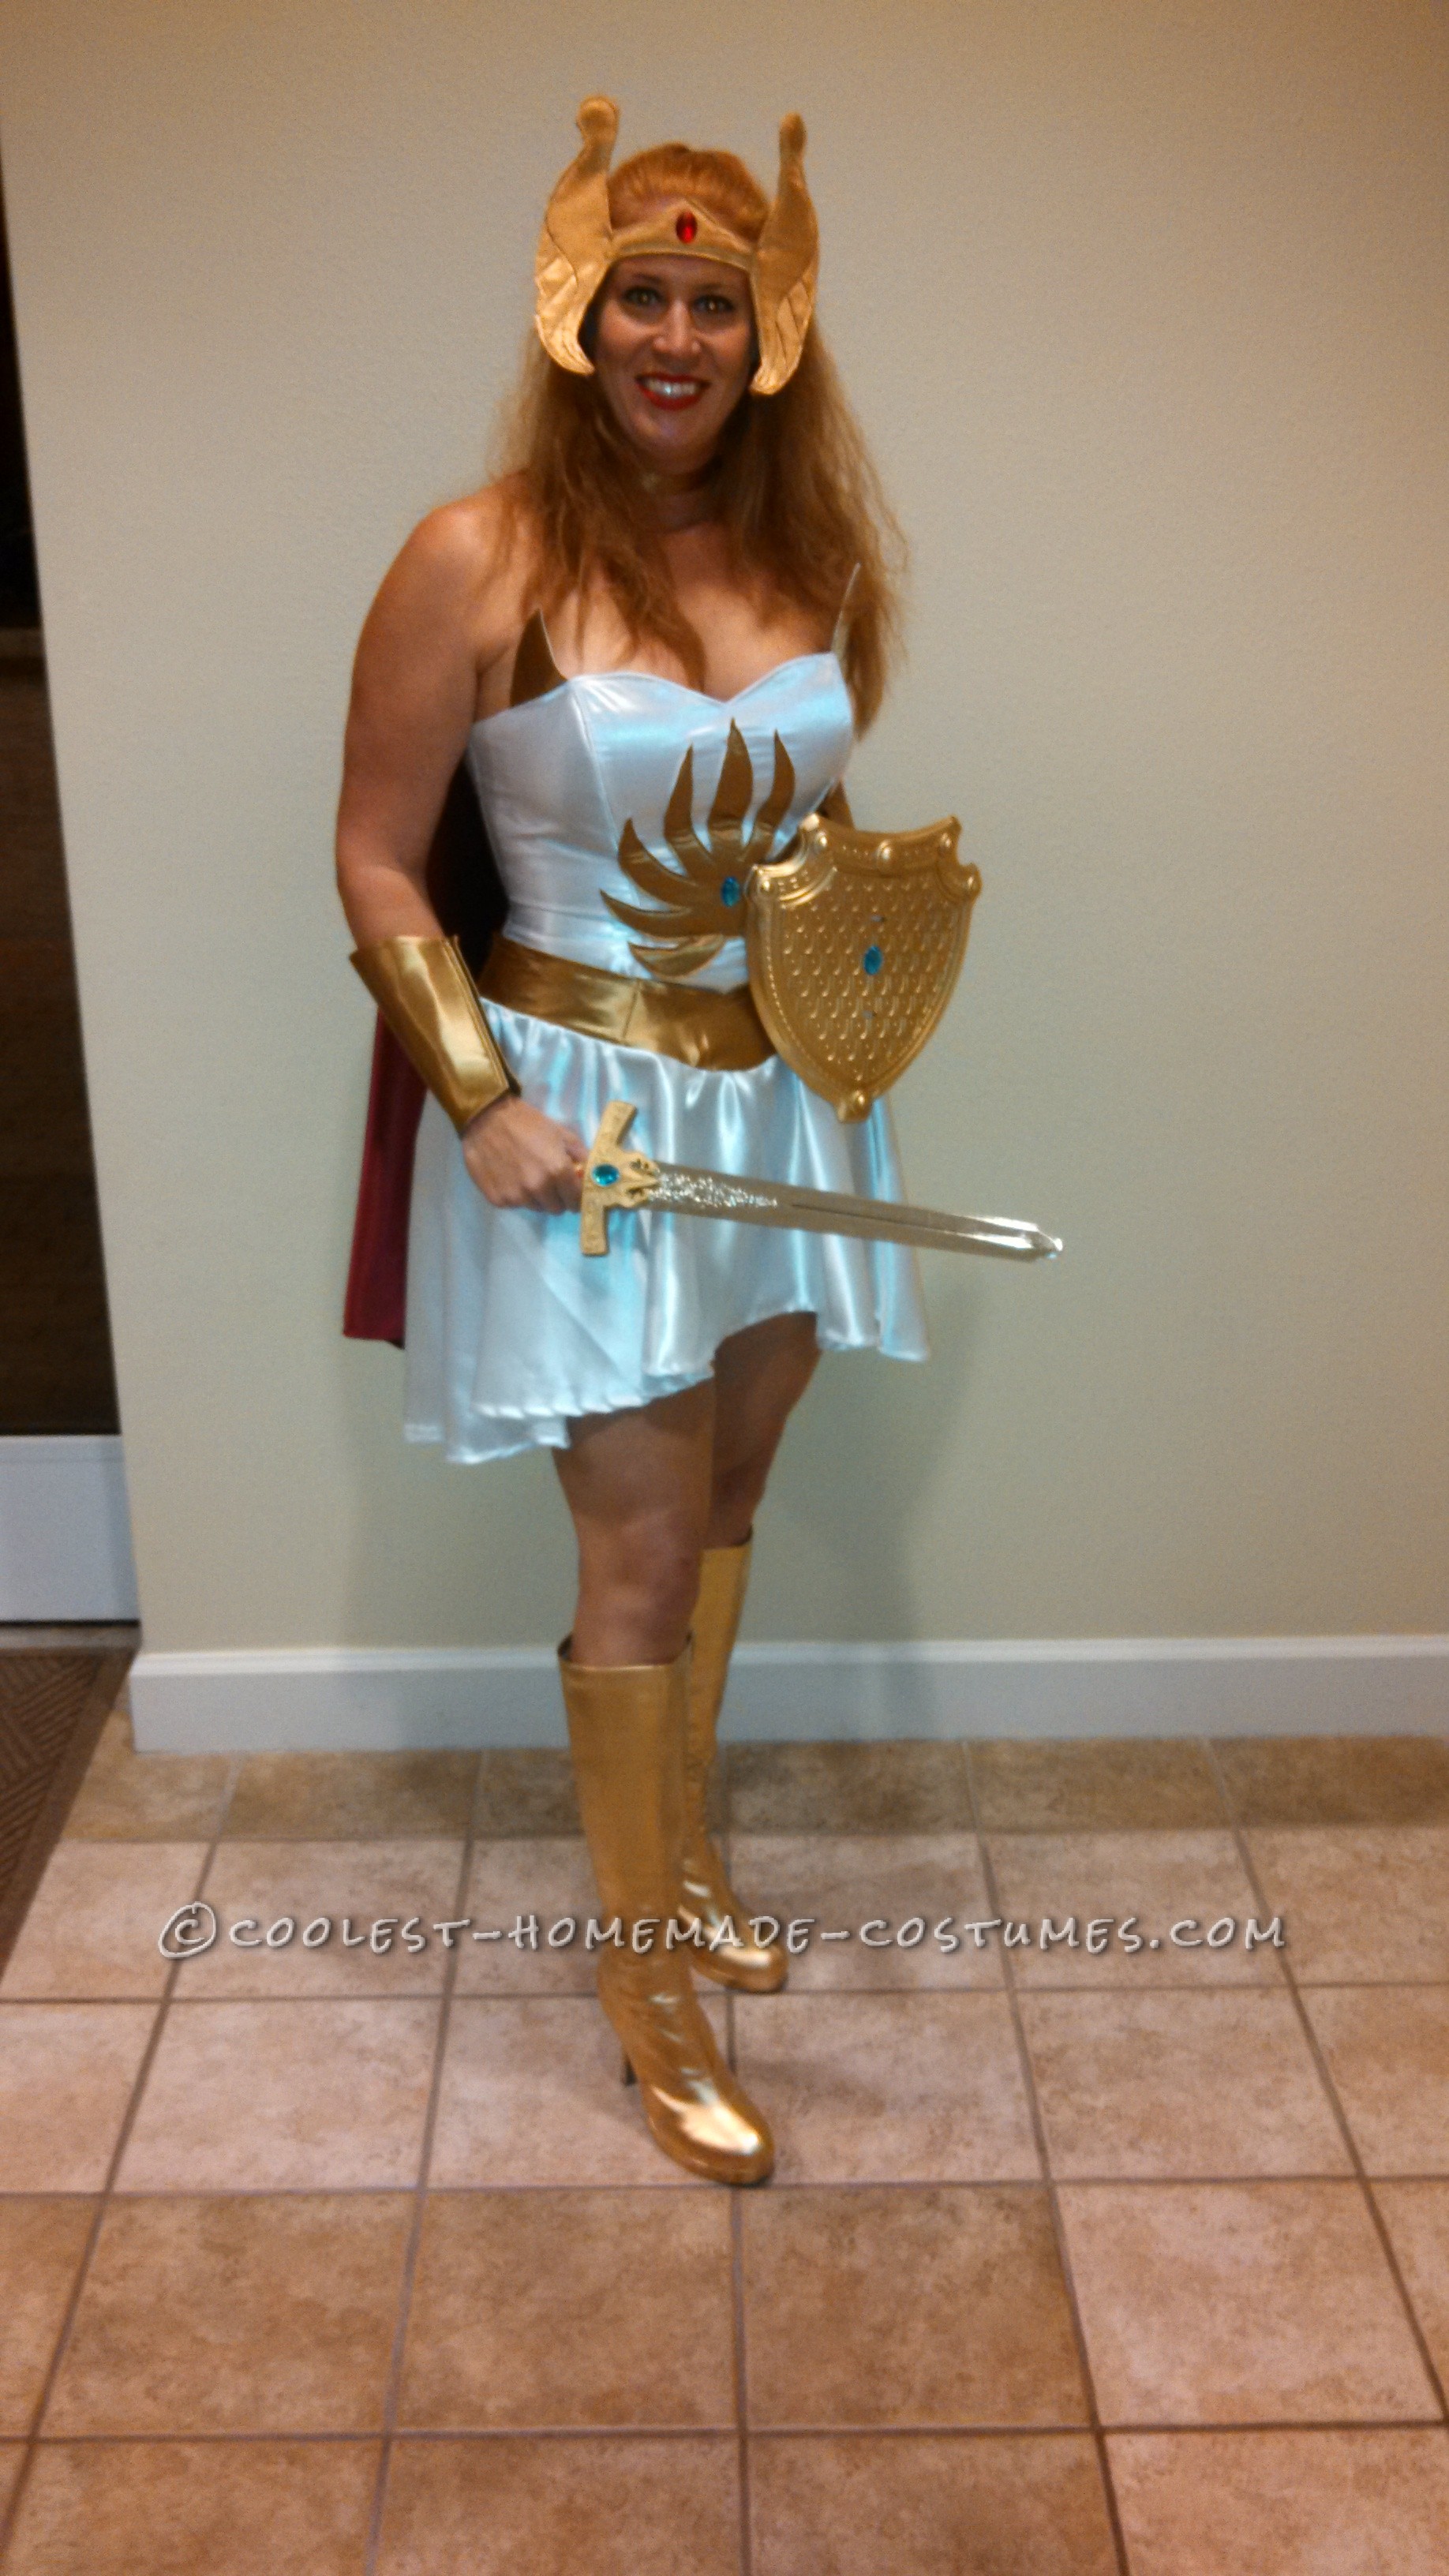 Comic-Con Worthy She-Ra Costume with Sound Effects!